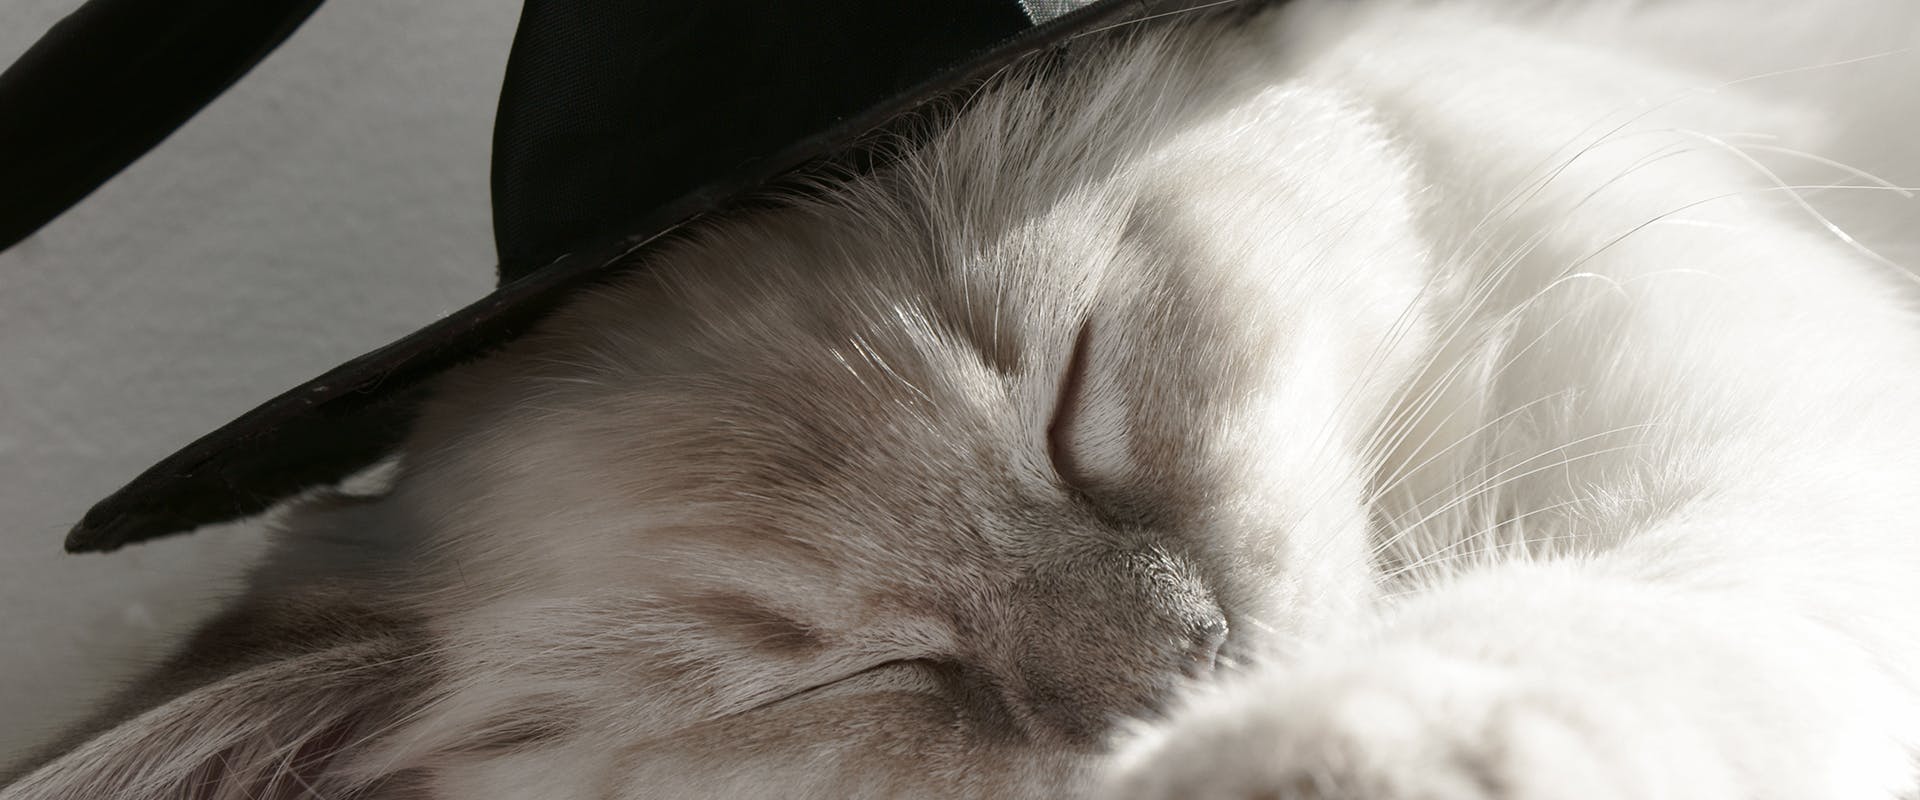 A cat wearing a witches hat, sleeping